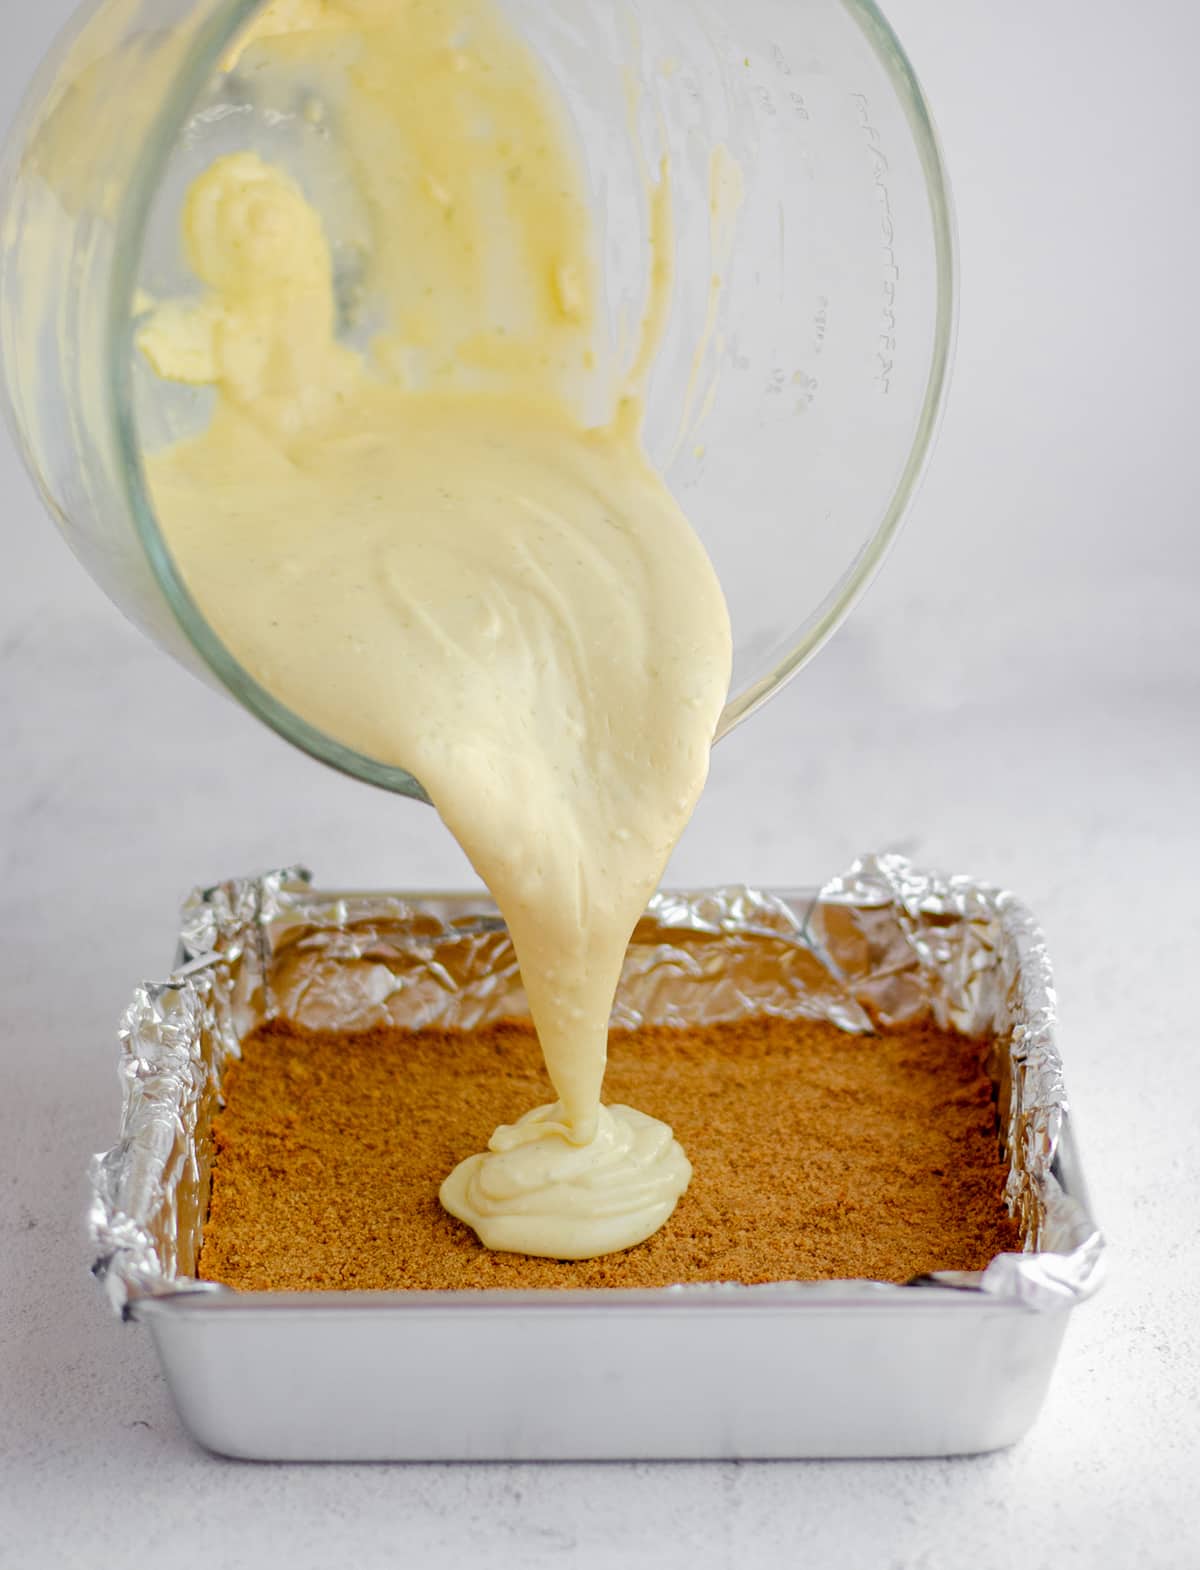 key lime pie batter being poured onto a baked graham cracker crust in a foil lined baking pan